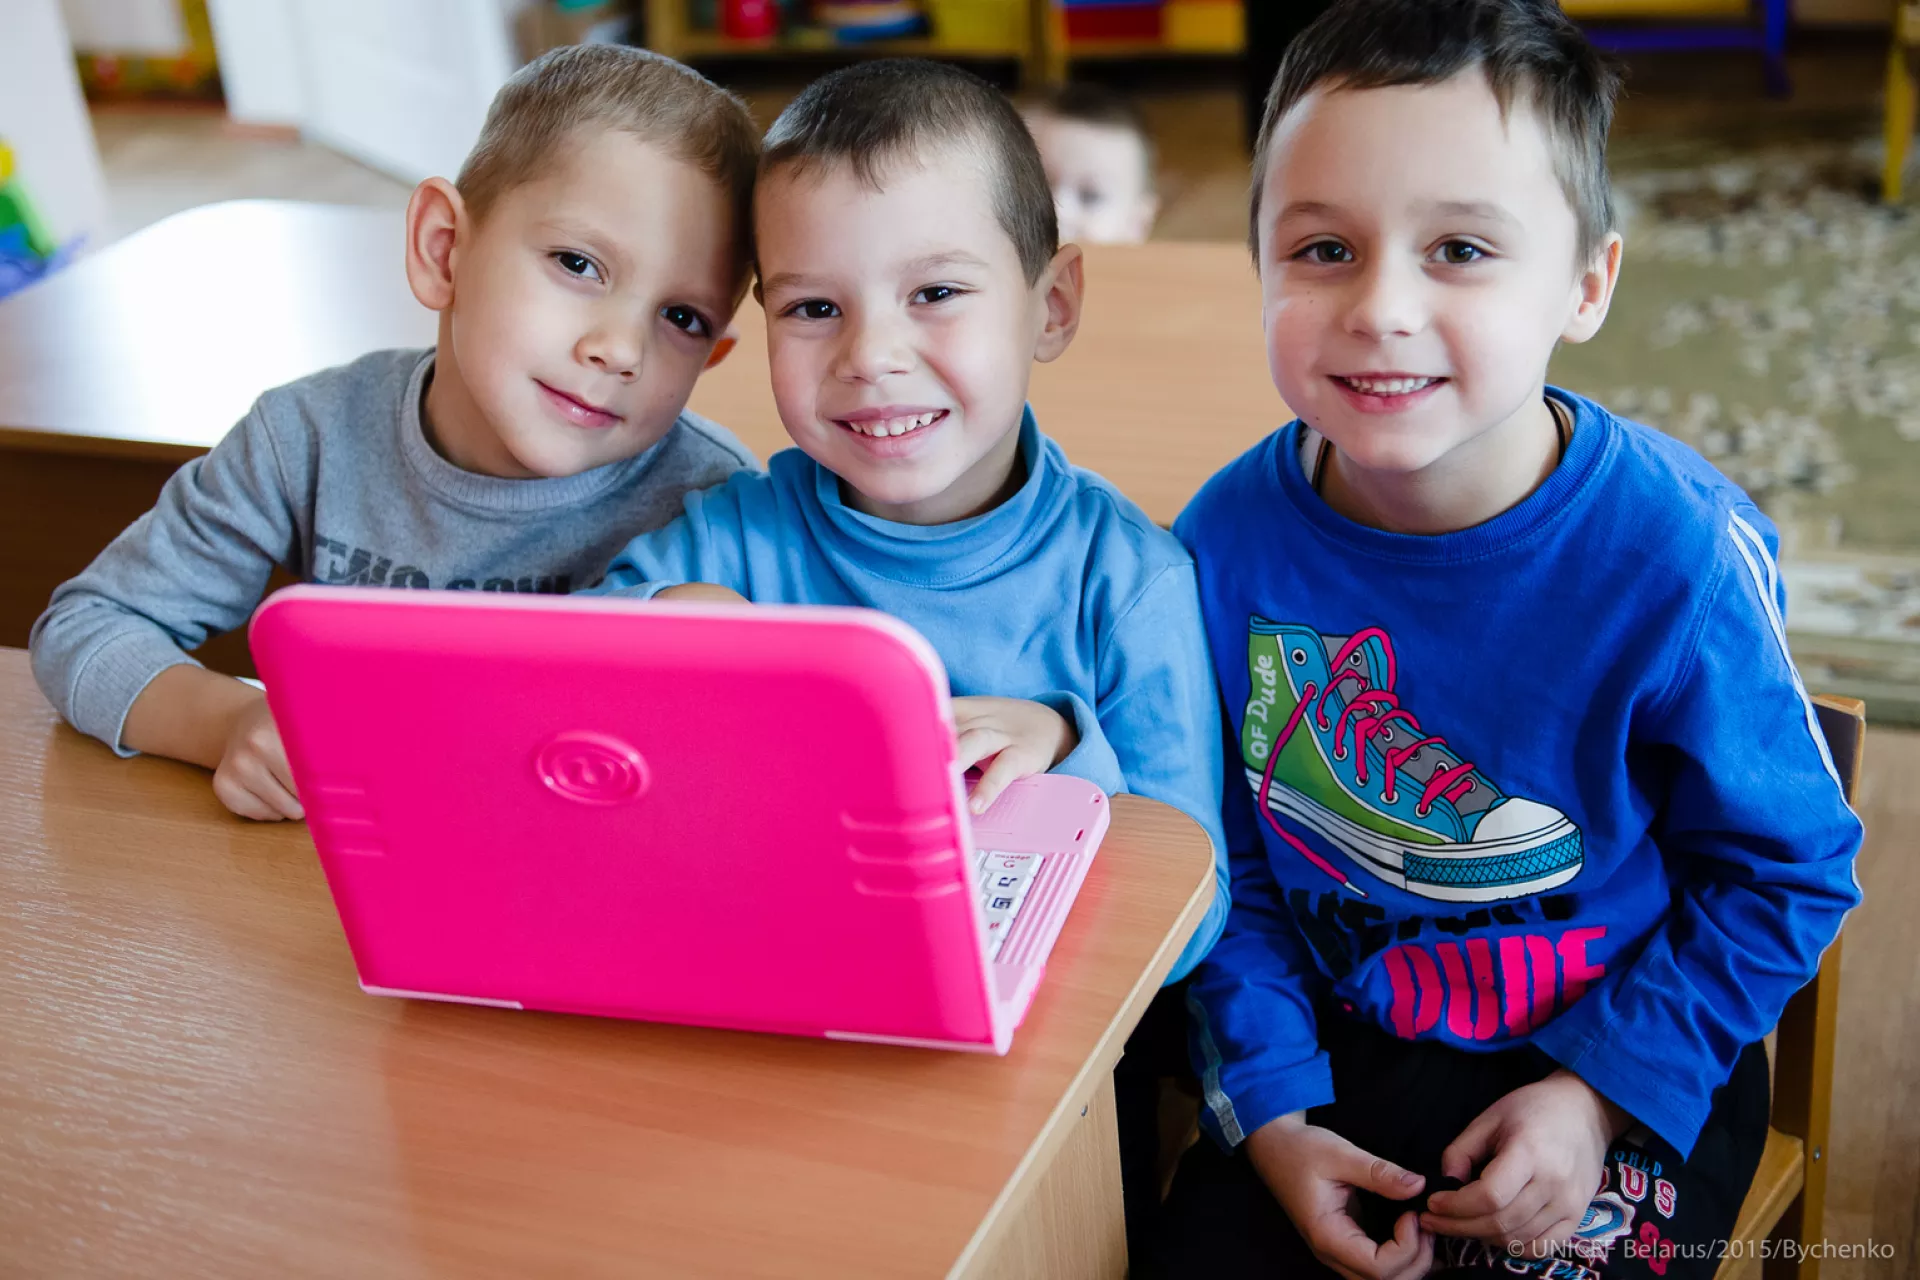 Three five-year-olds take part in a Kindergarten literacy and maths lesson on a small pink laptop.